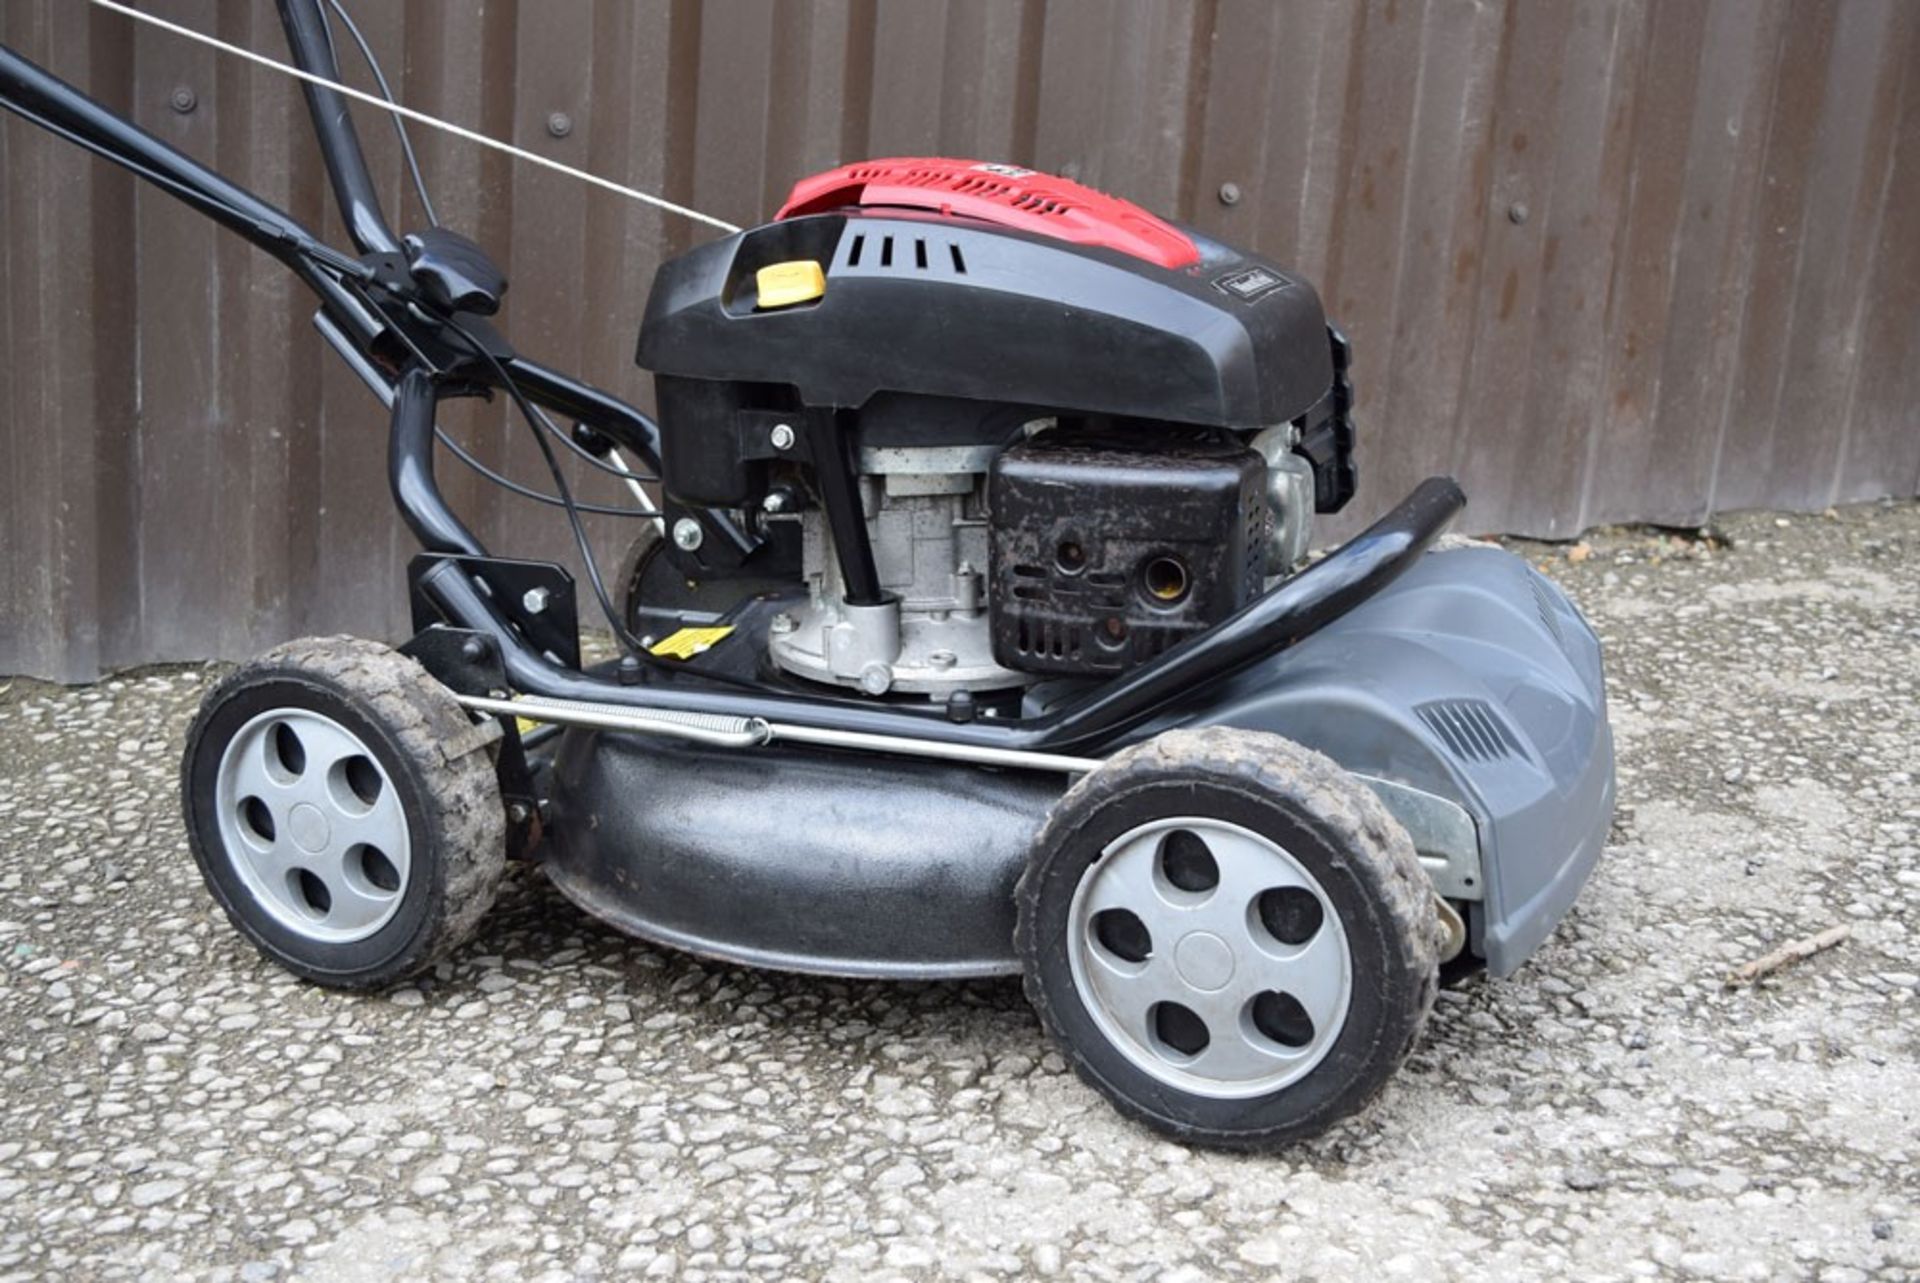 2009 Mountfield Multiclip 501 SP 48cm Self-Propelled Rotary Mower - Image 6 of 7